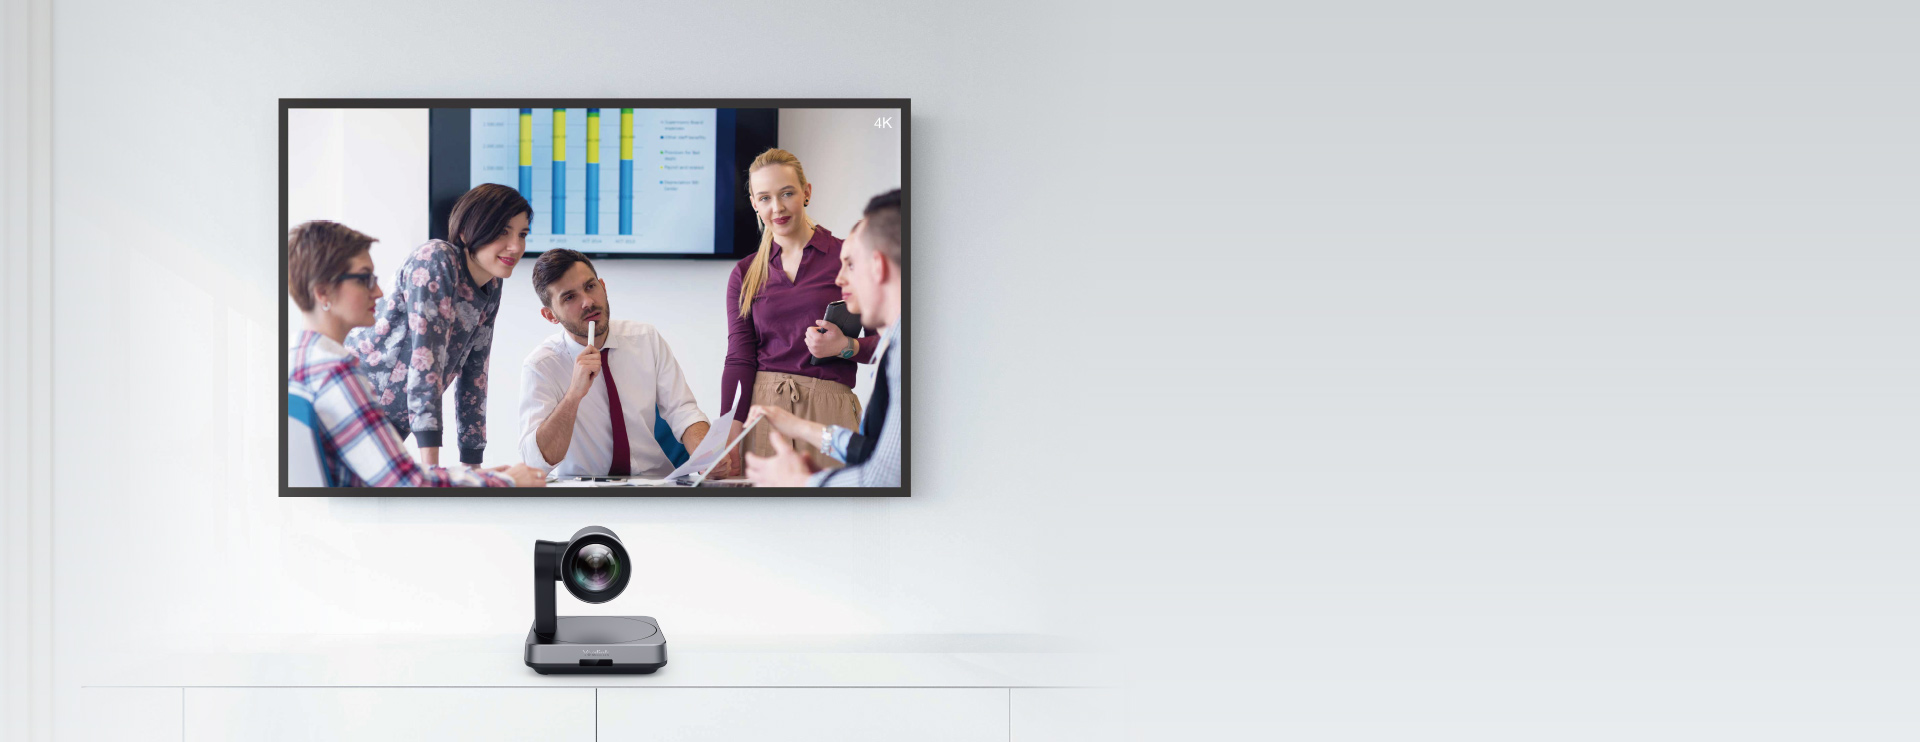 Yealink 4K PTZ Camera for medium and large room with perfect display